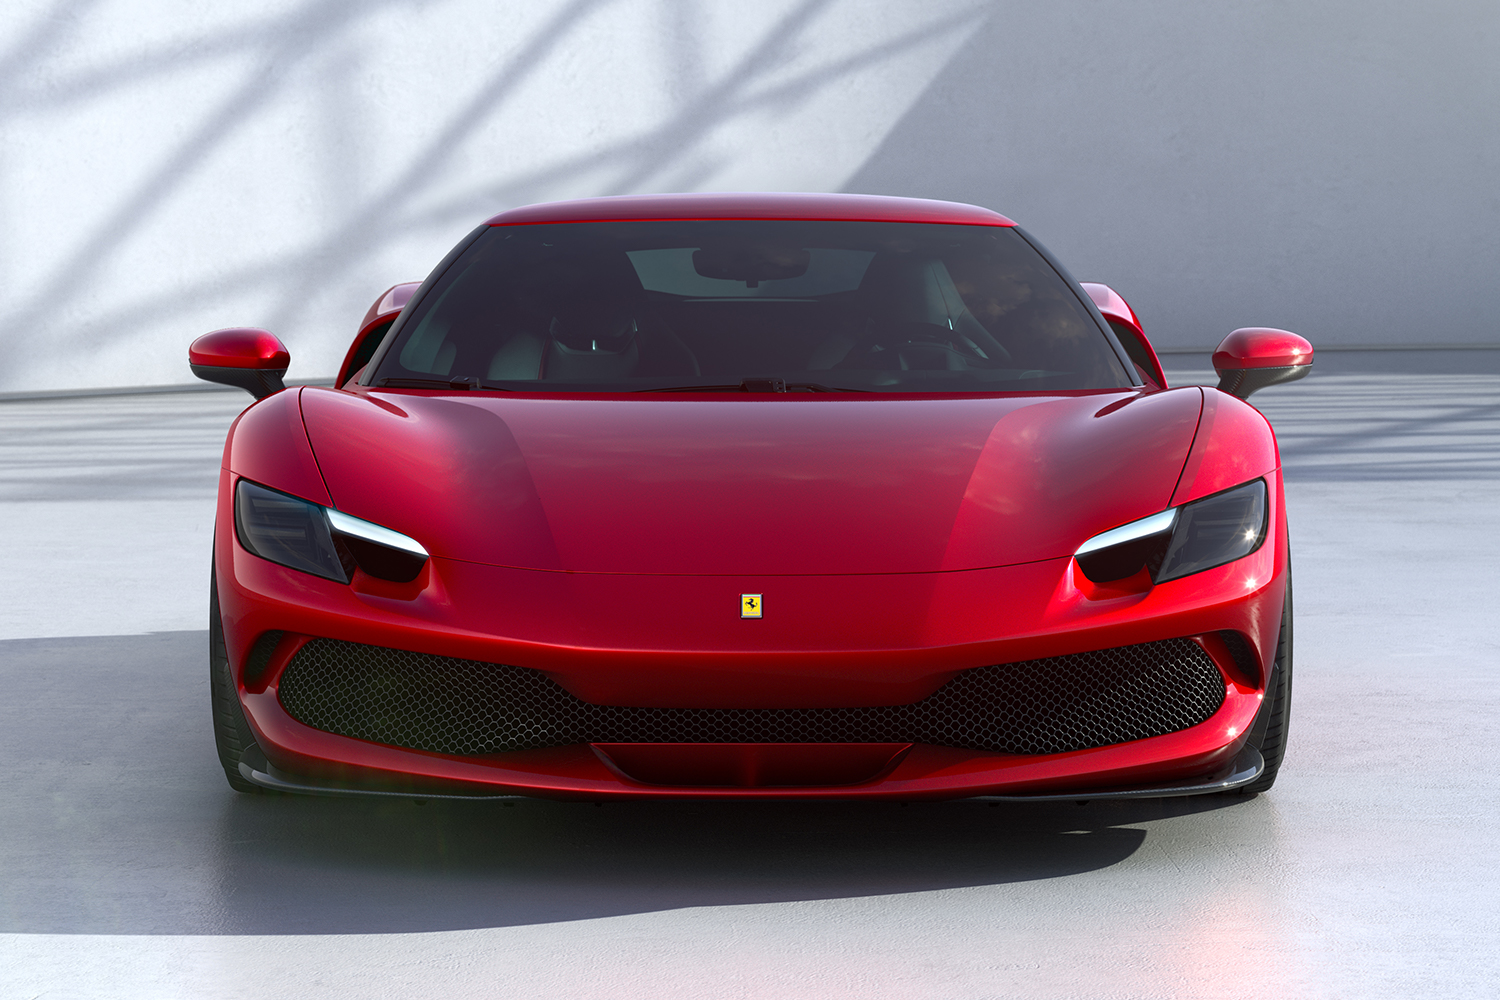 The front end of the red Ferrari 296 GTB, a new plug-in hybrid car from the Italian marque.